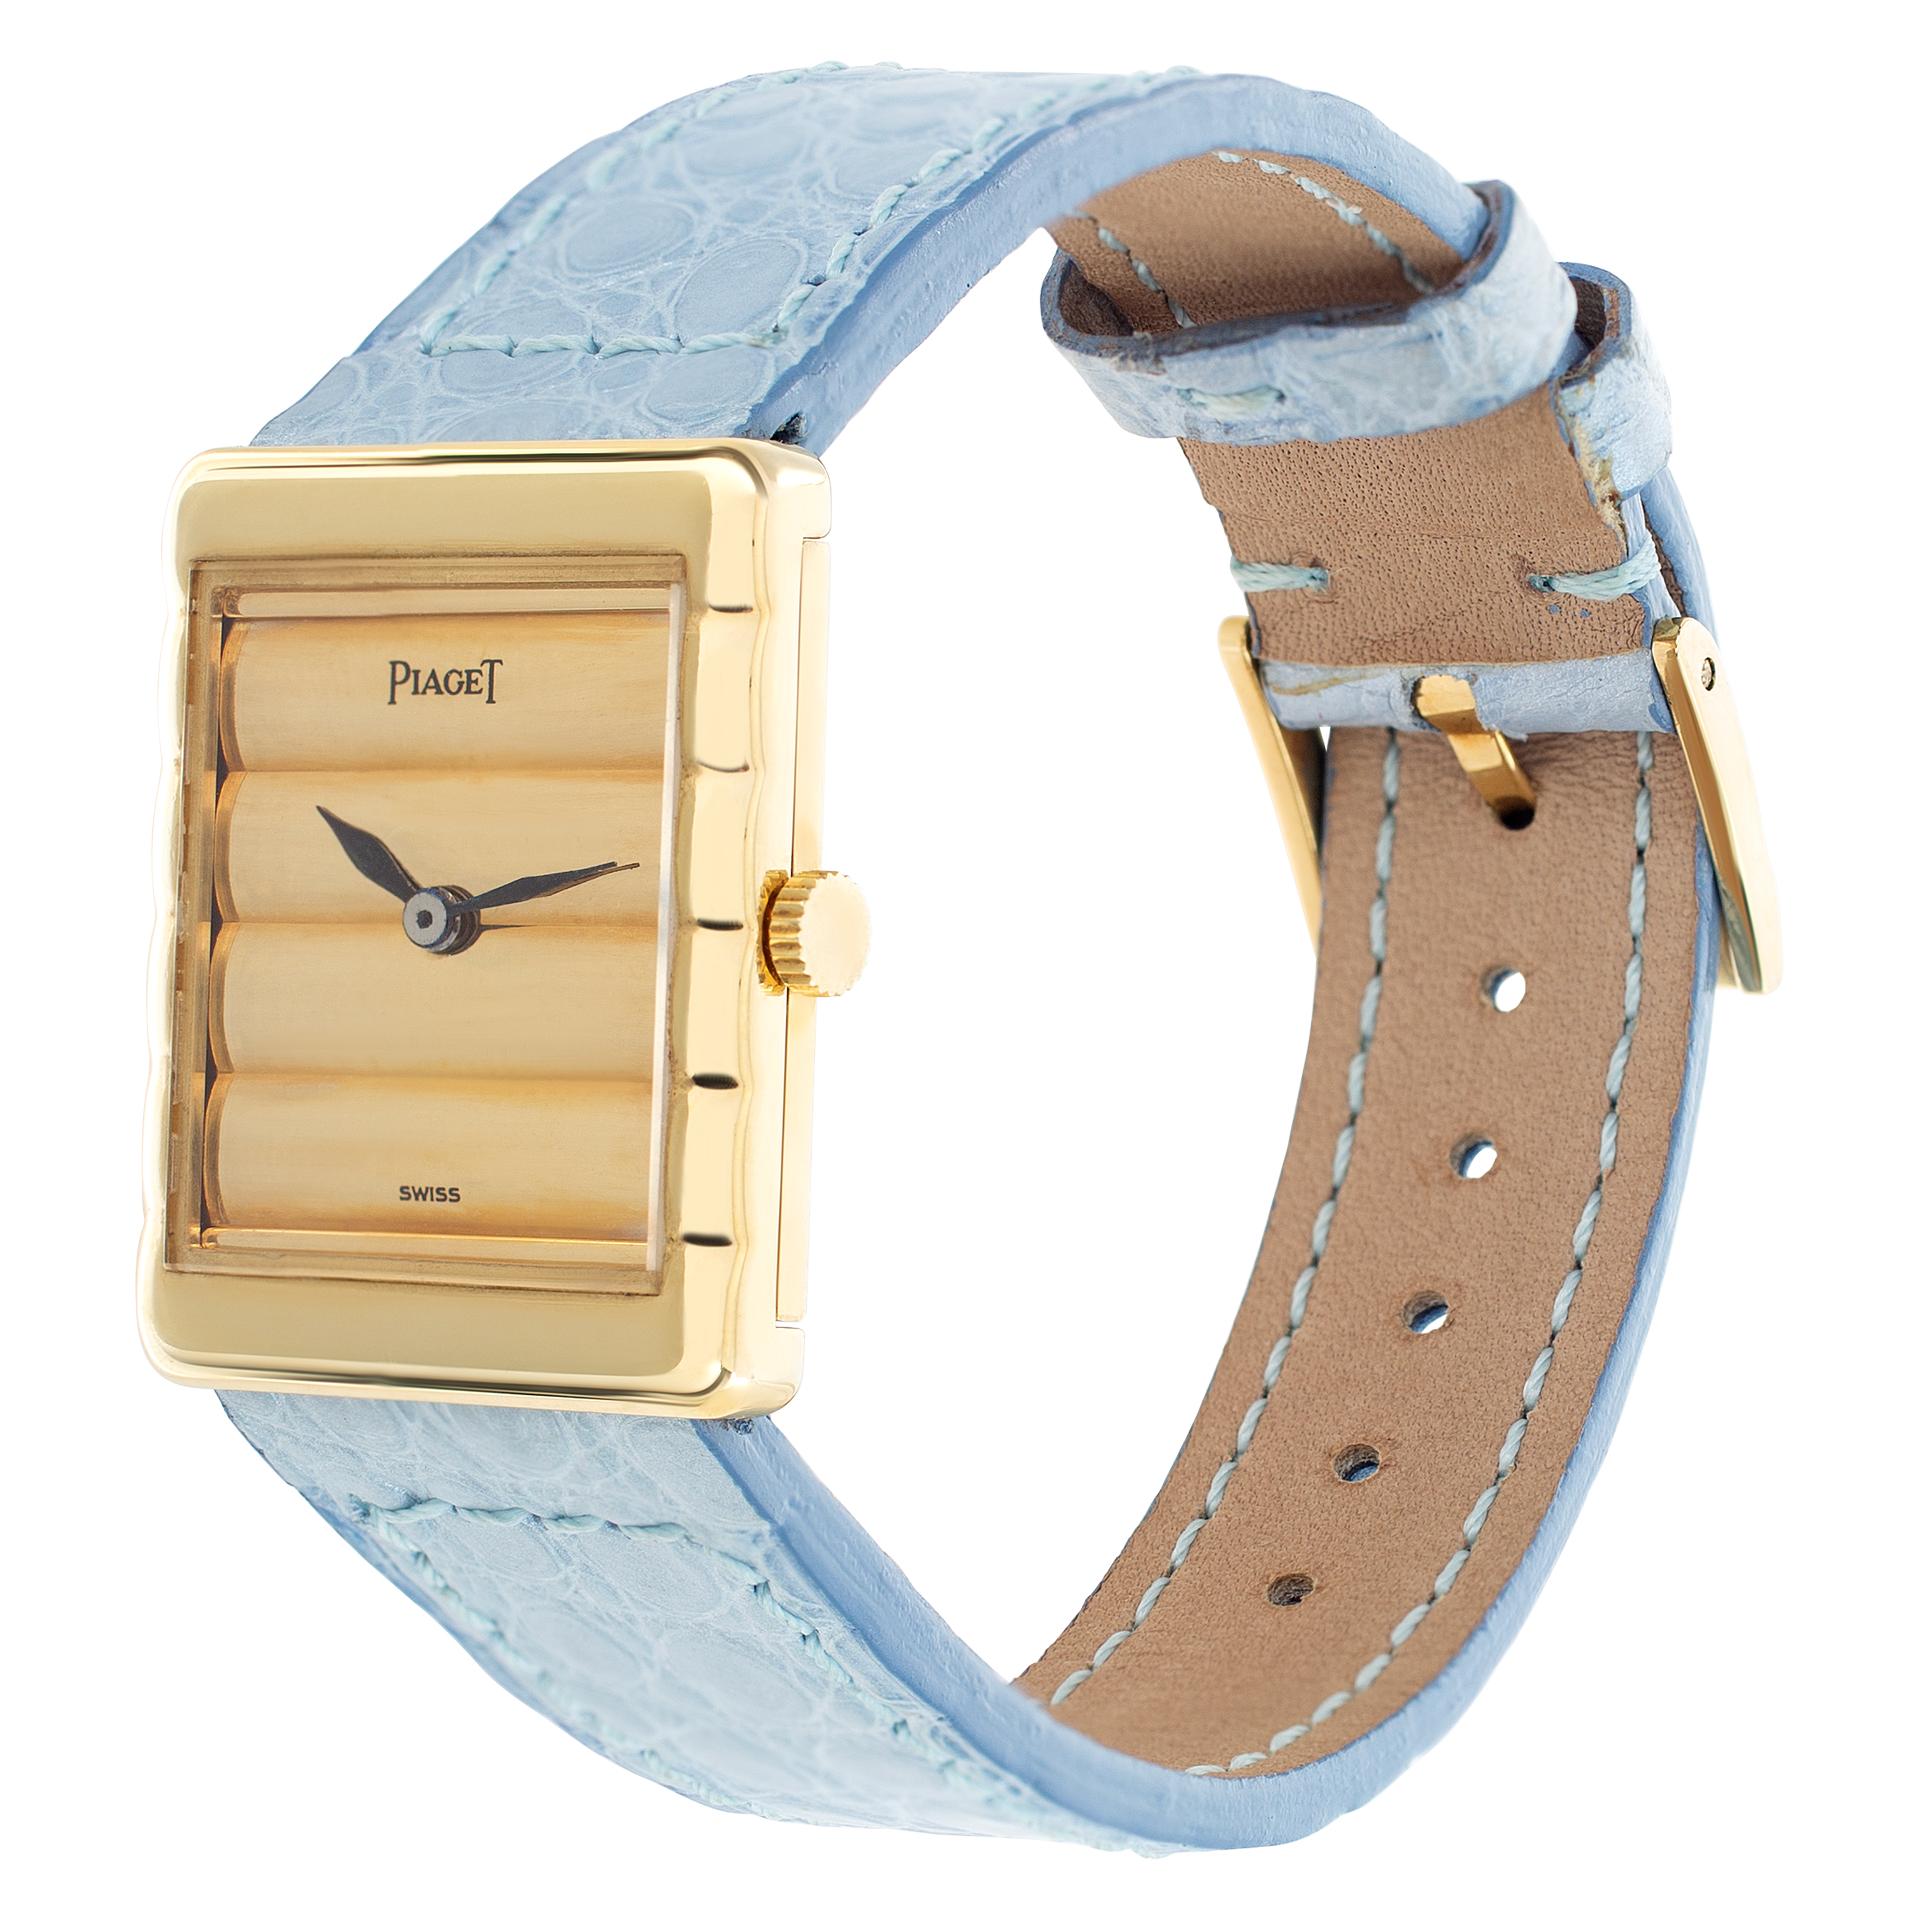 Piaget Classic in 18k on leather strap with an original Piaget 18k tang buckle. Manual. Measures 25mm (lug to lug) by 20mm wide. Ref 40800. Fine Pre-owned Piaget Watch. Certified preowned Dress Piaget Classic 40800 watch is made out of yellow gold